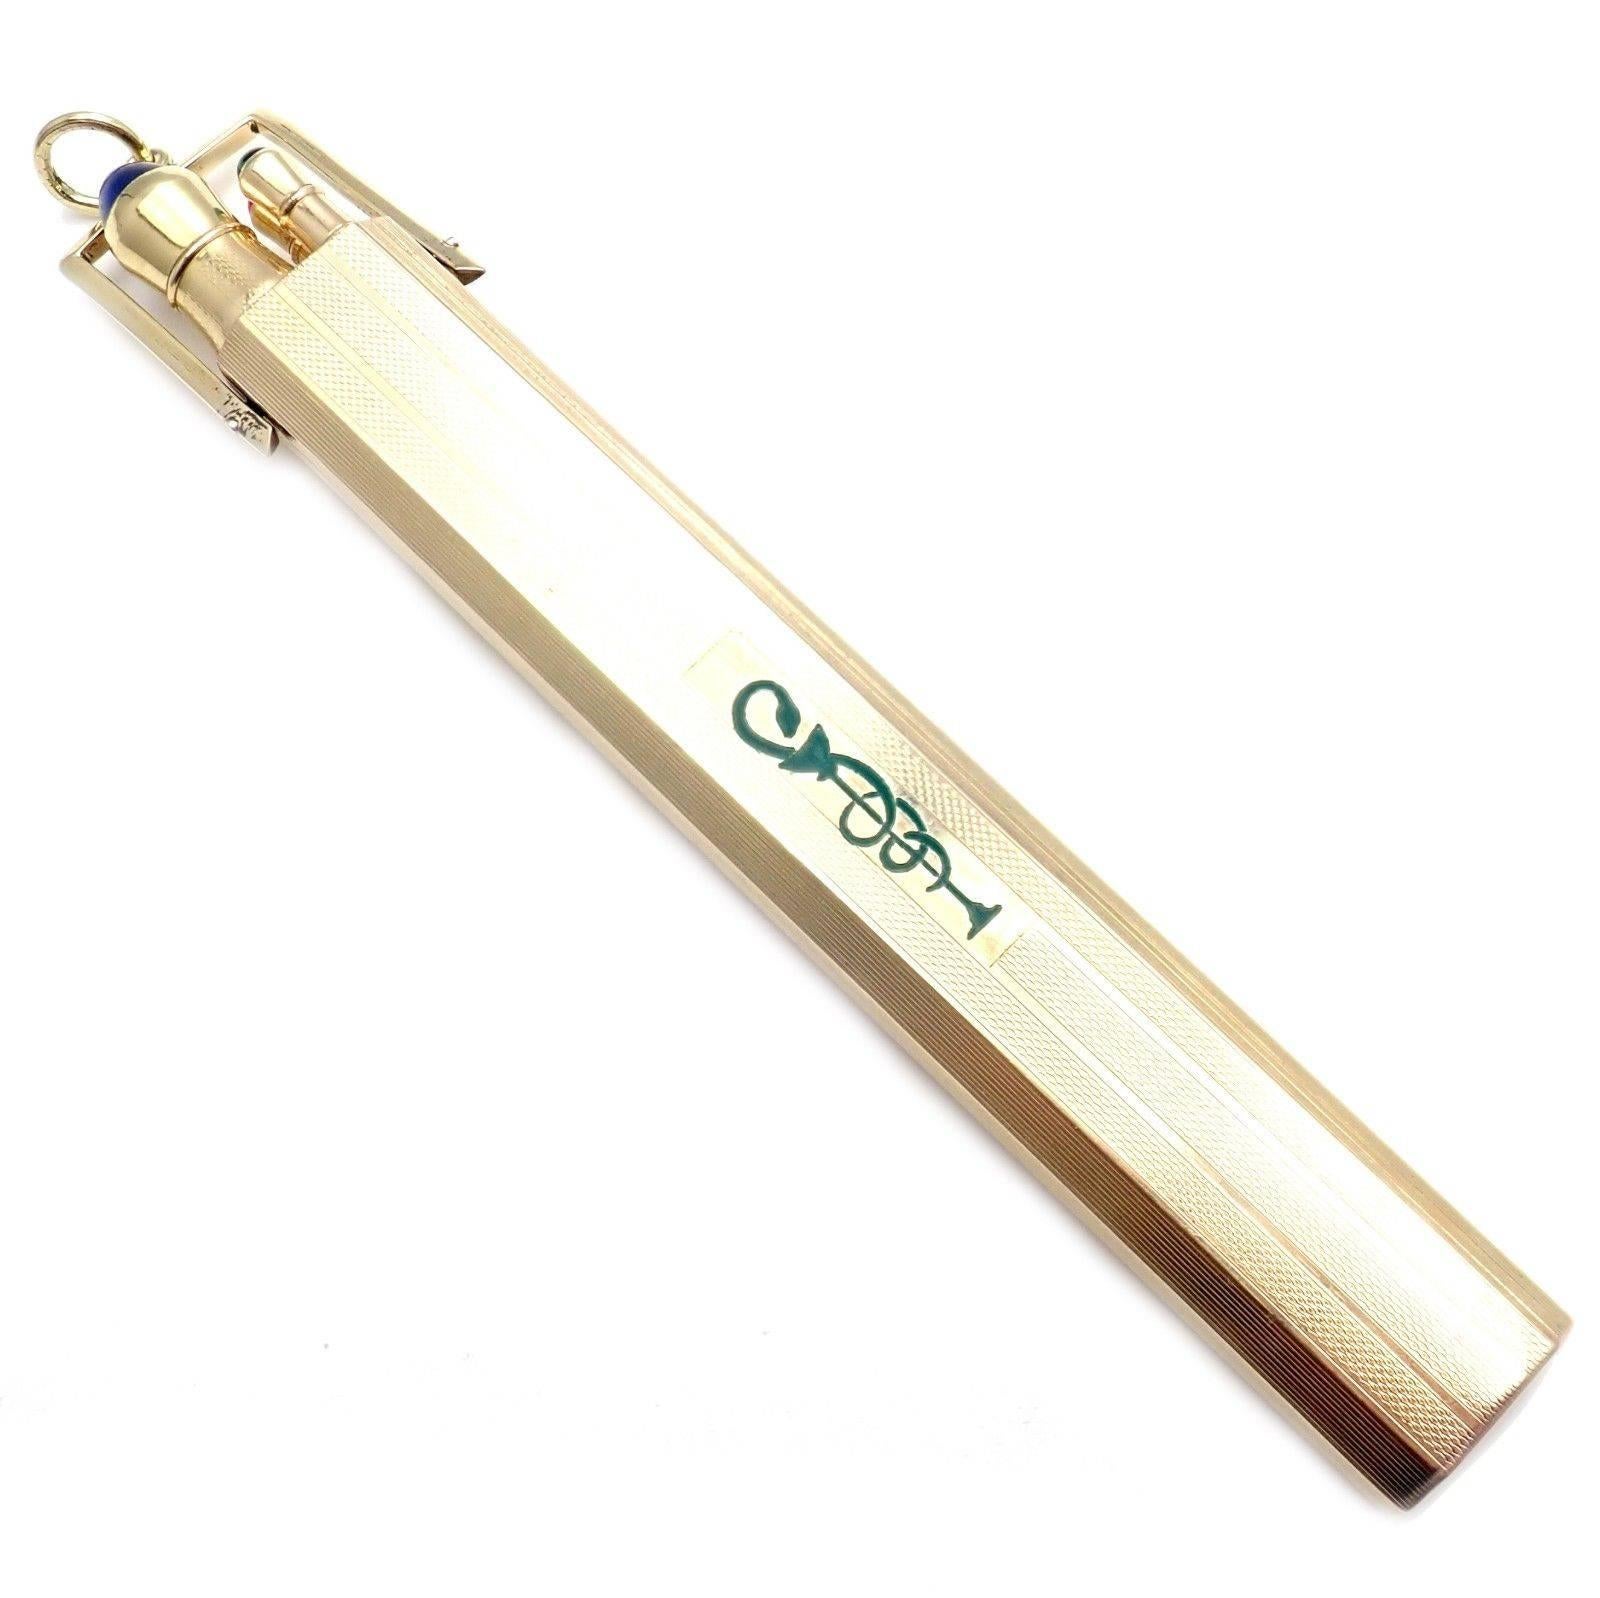 VIntage 14k Solid Yellow Gold Enamel Ruby Emerald Sapphire Doctors Pen Pencil Thermometer Kit Set.
With Case Has Green Enamel Logo
Fountain Pen Sapphire: 7mm
Thermometer Emerald: 3mm
Pencil Ruby: 3.5mm
Details:
Total Size: 123mm x 16mm x